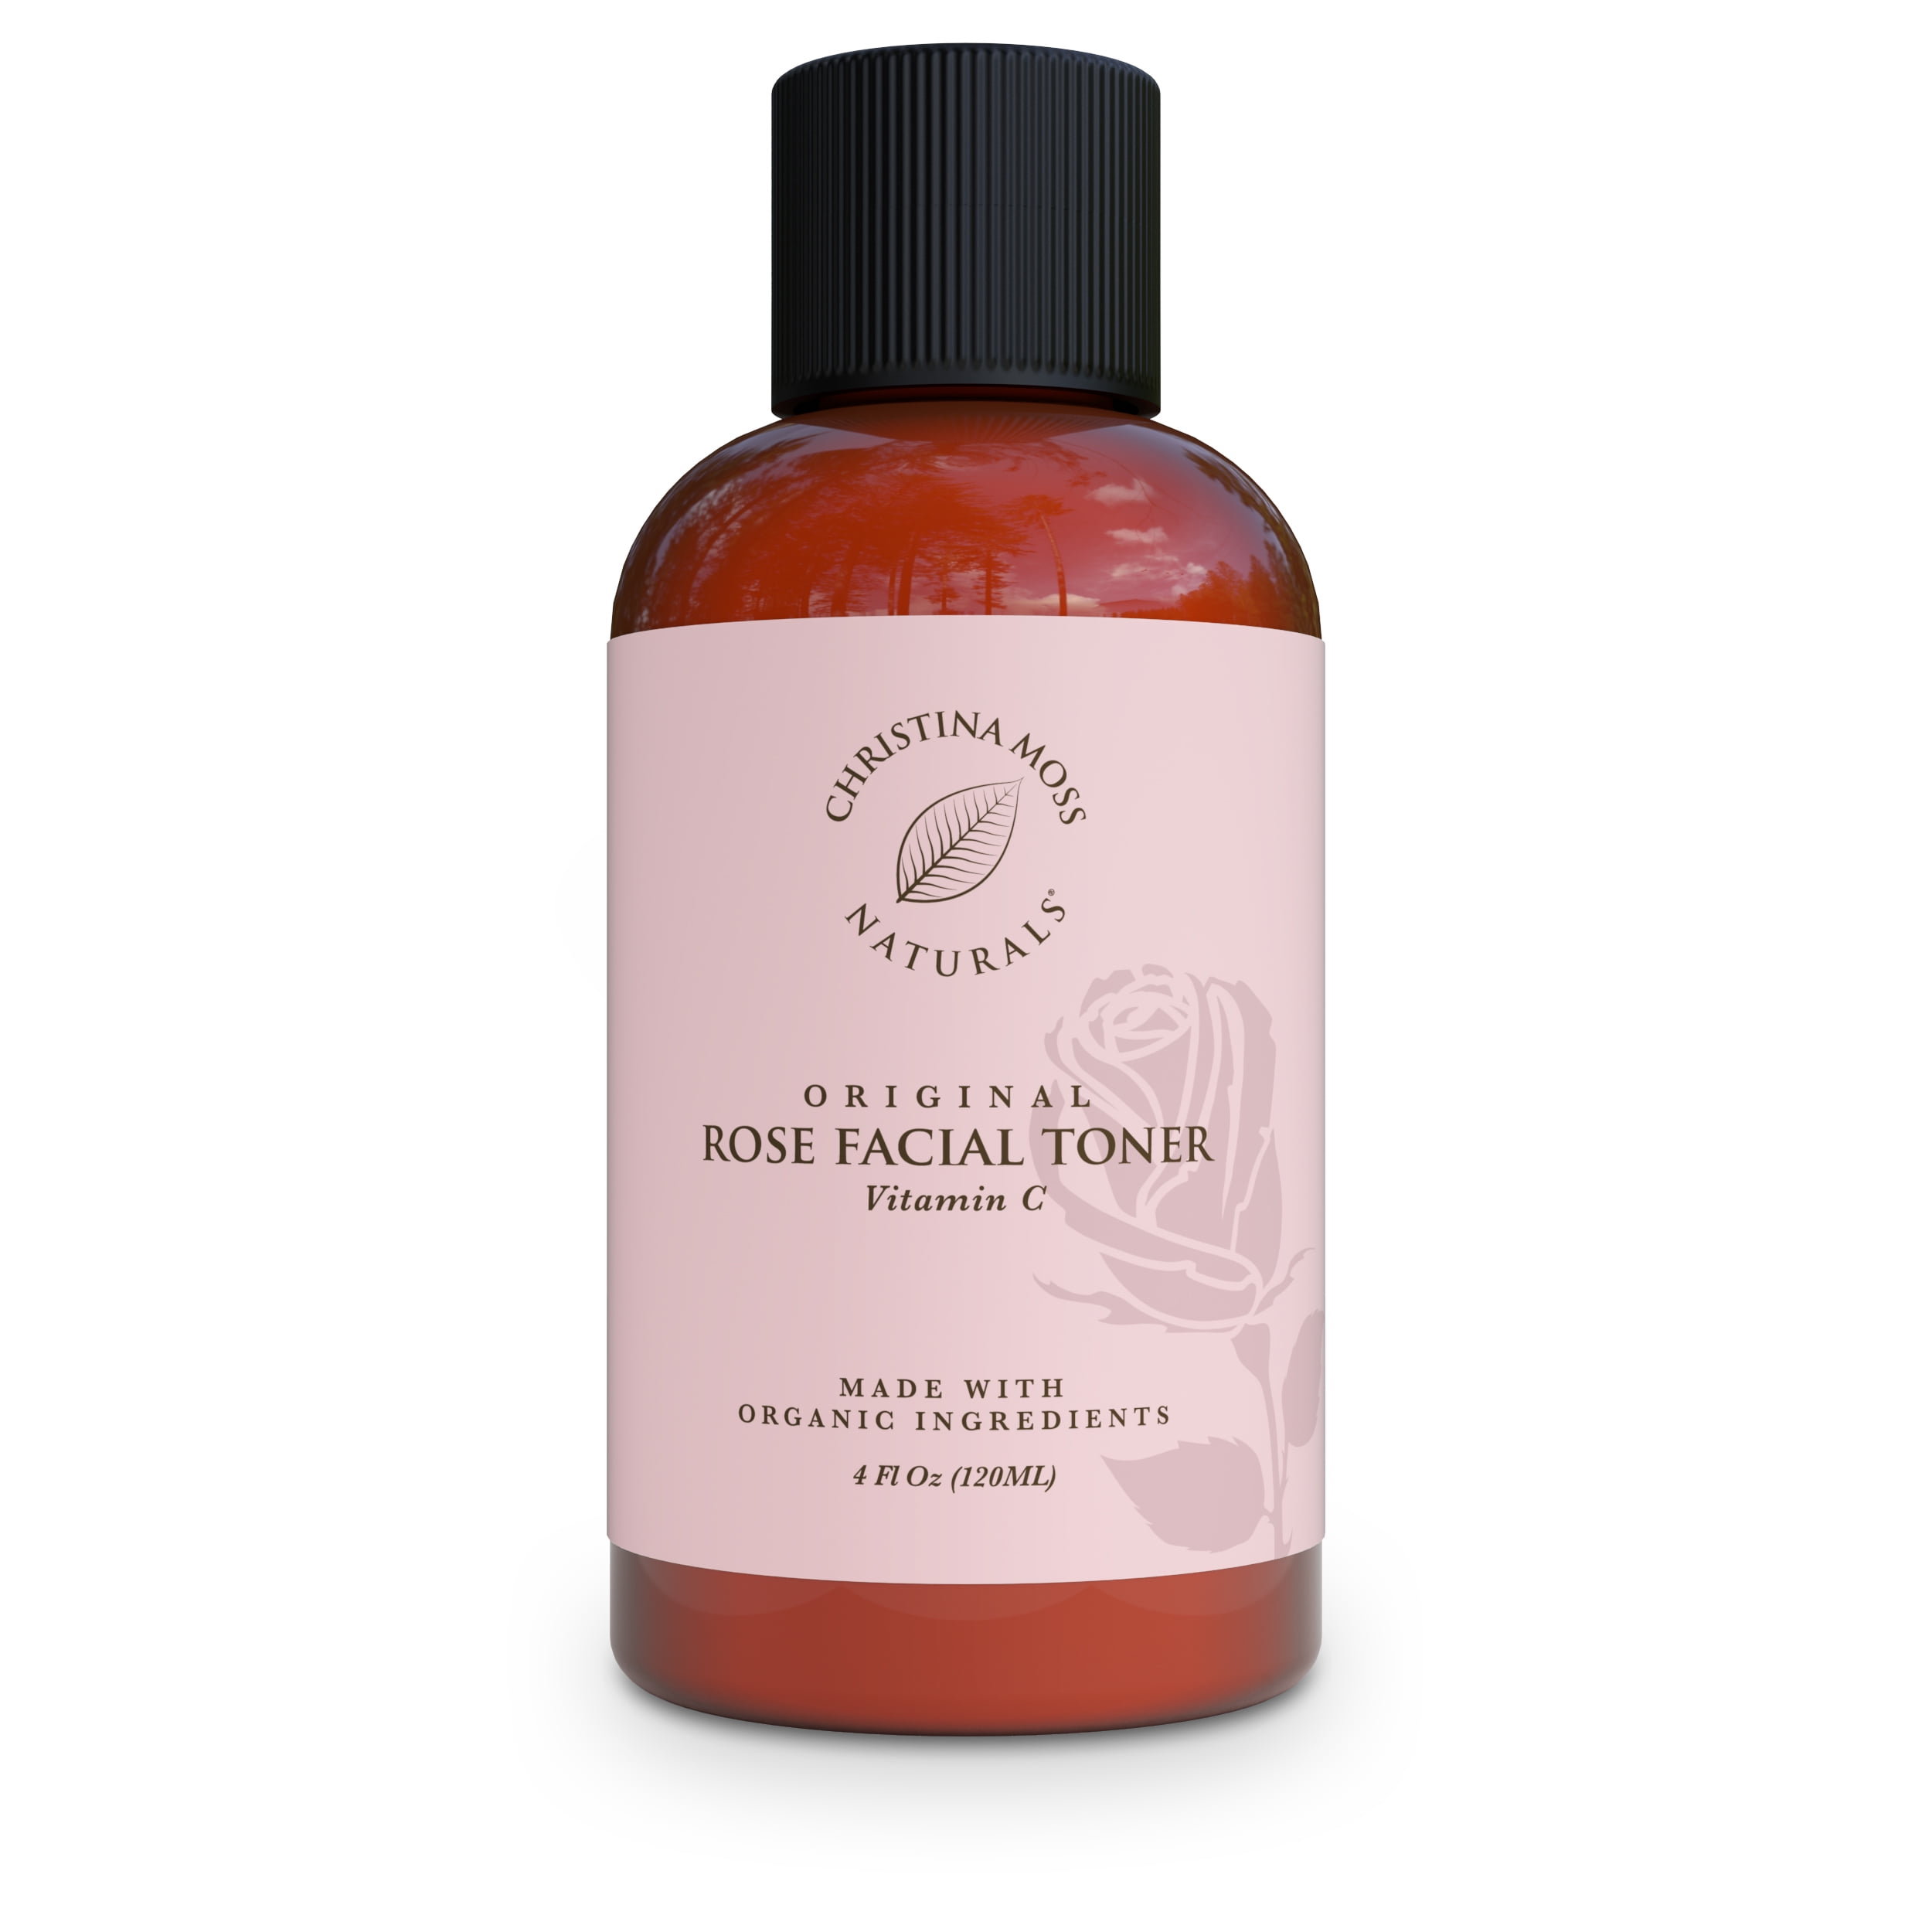 Rose Water Facial Toner - Face Toner with Witch Hazel, Vitamin C and Organic Aloe Vera - Skin Clearing, Tightens Pores, Hydrates, Restores pH pic